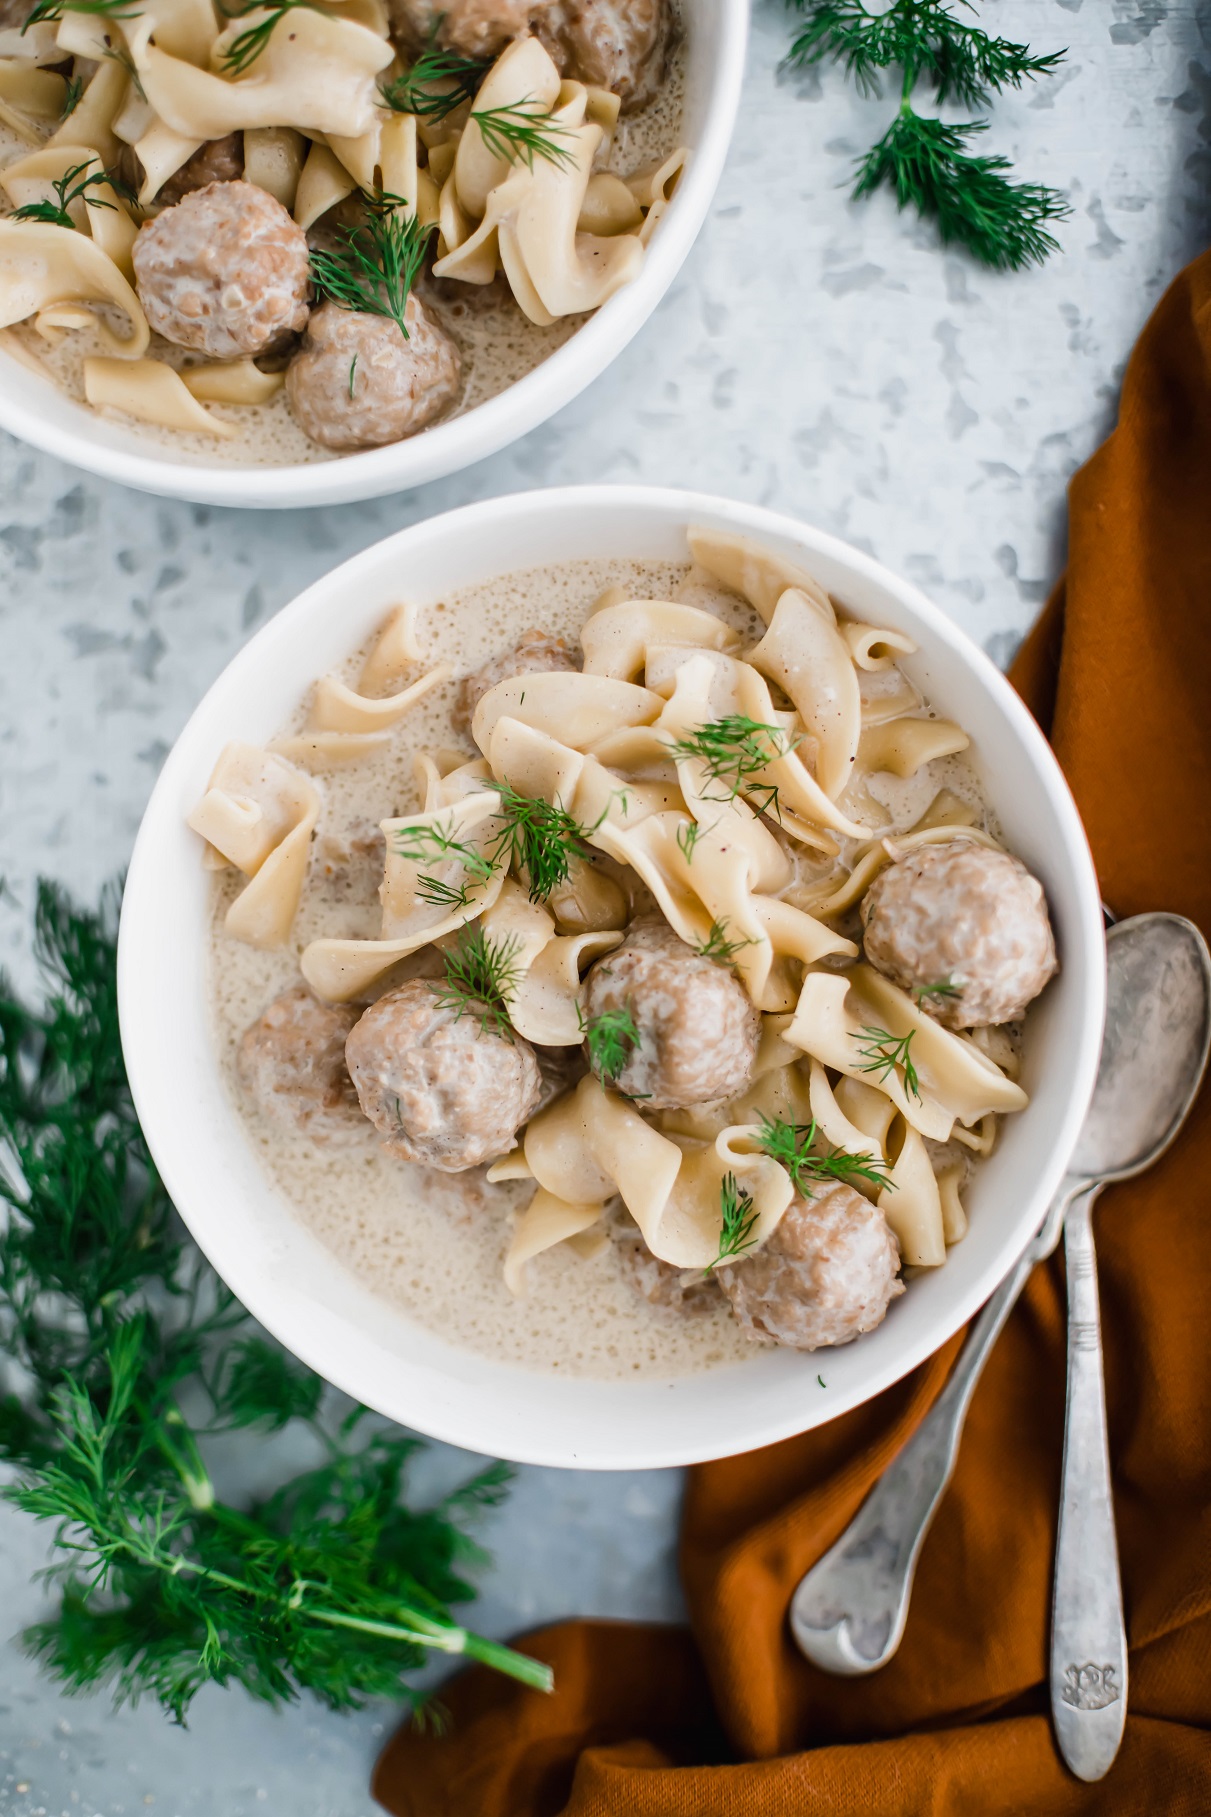 Two bowls of swedish meatball soup garnished with fresh dill. Two spoons to the right side.